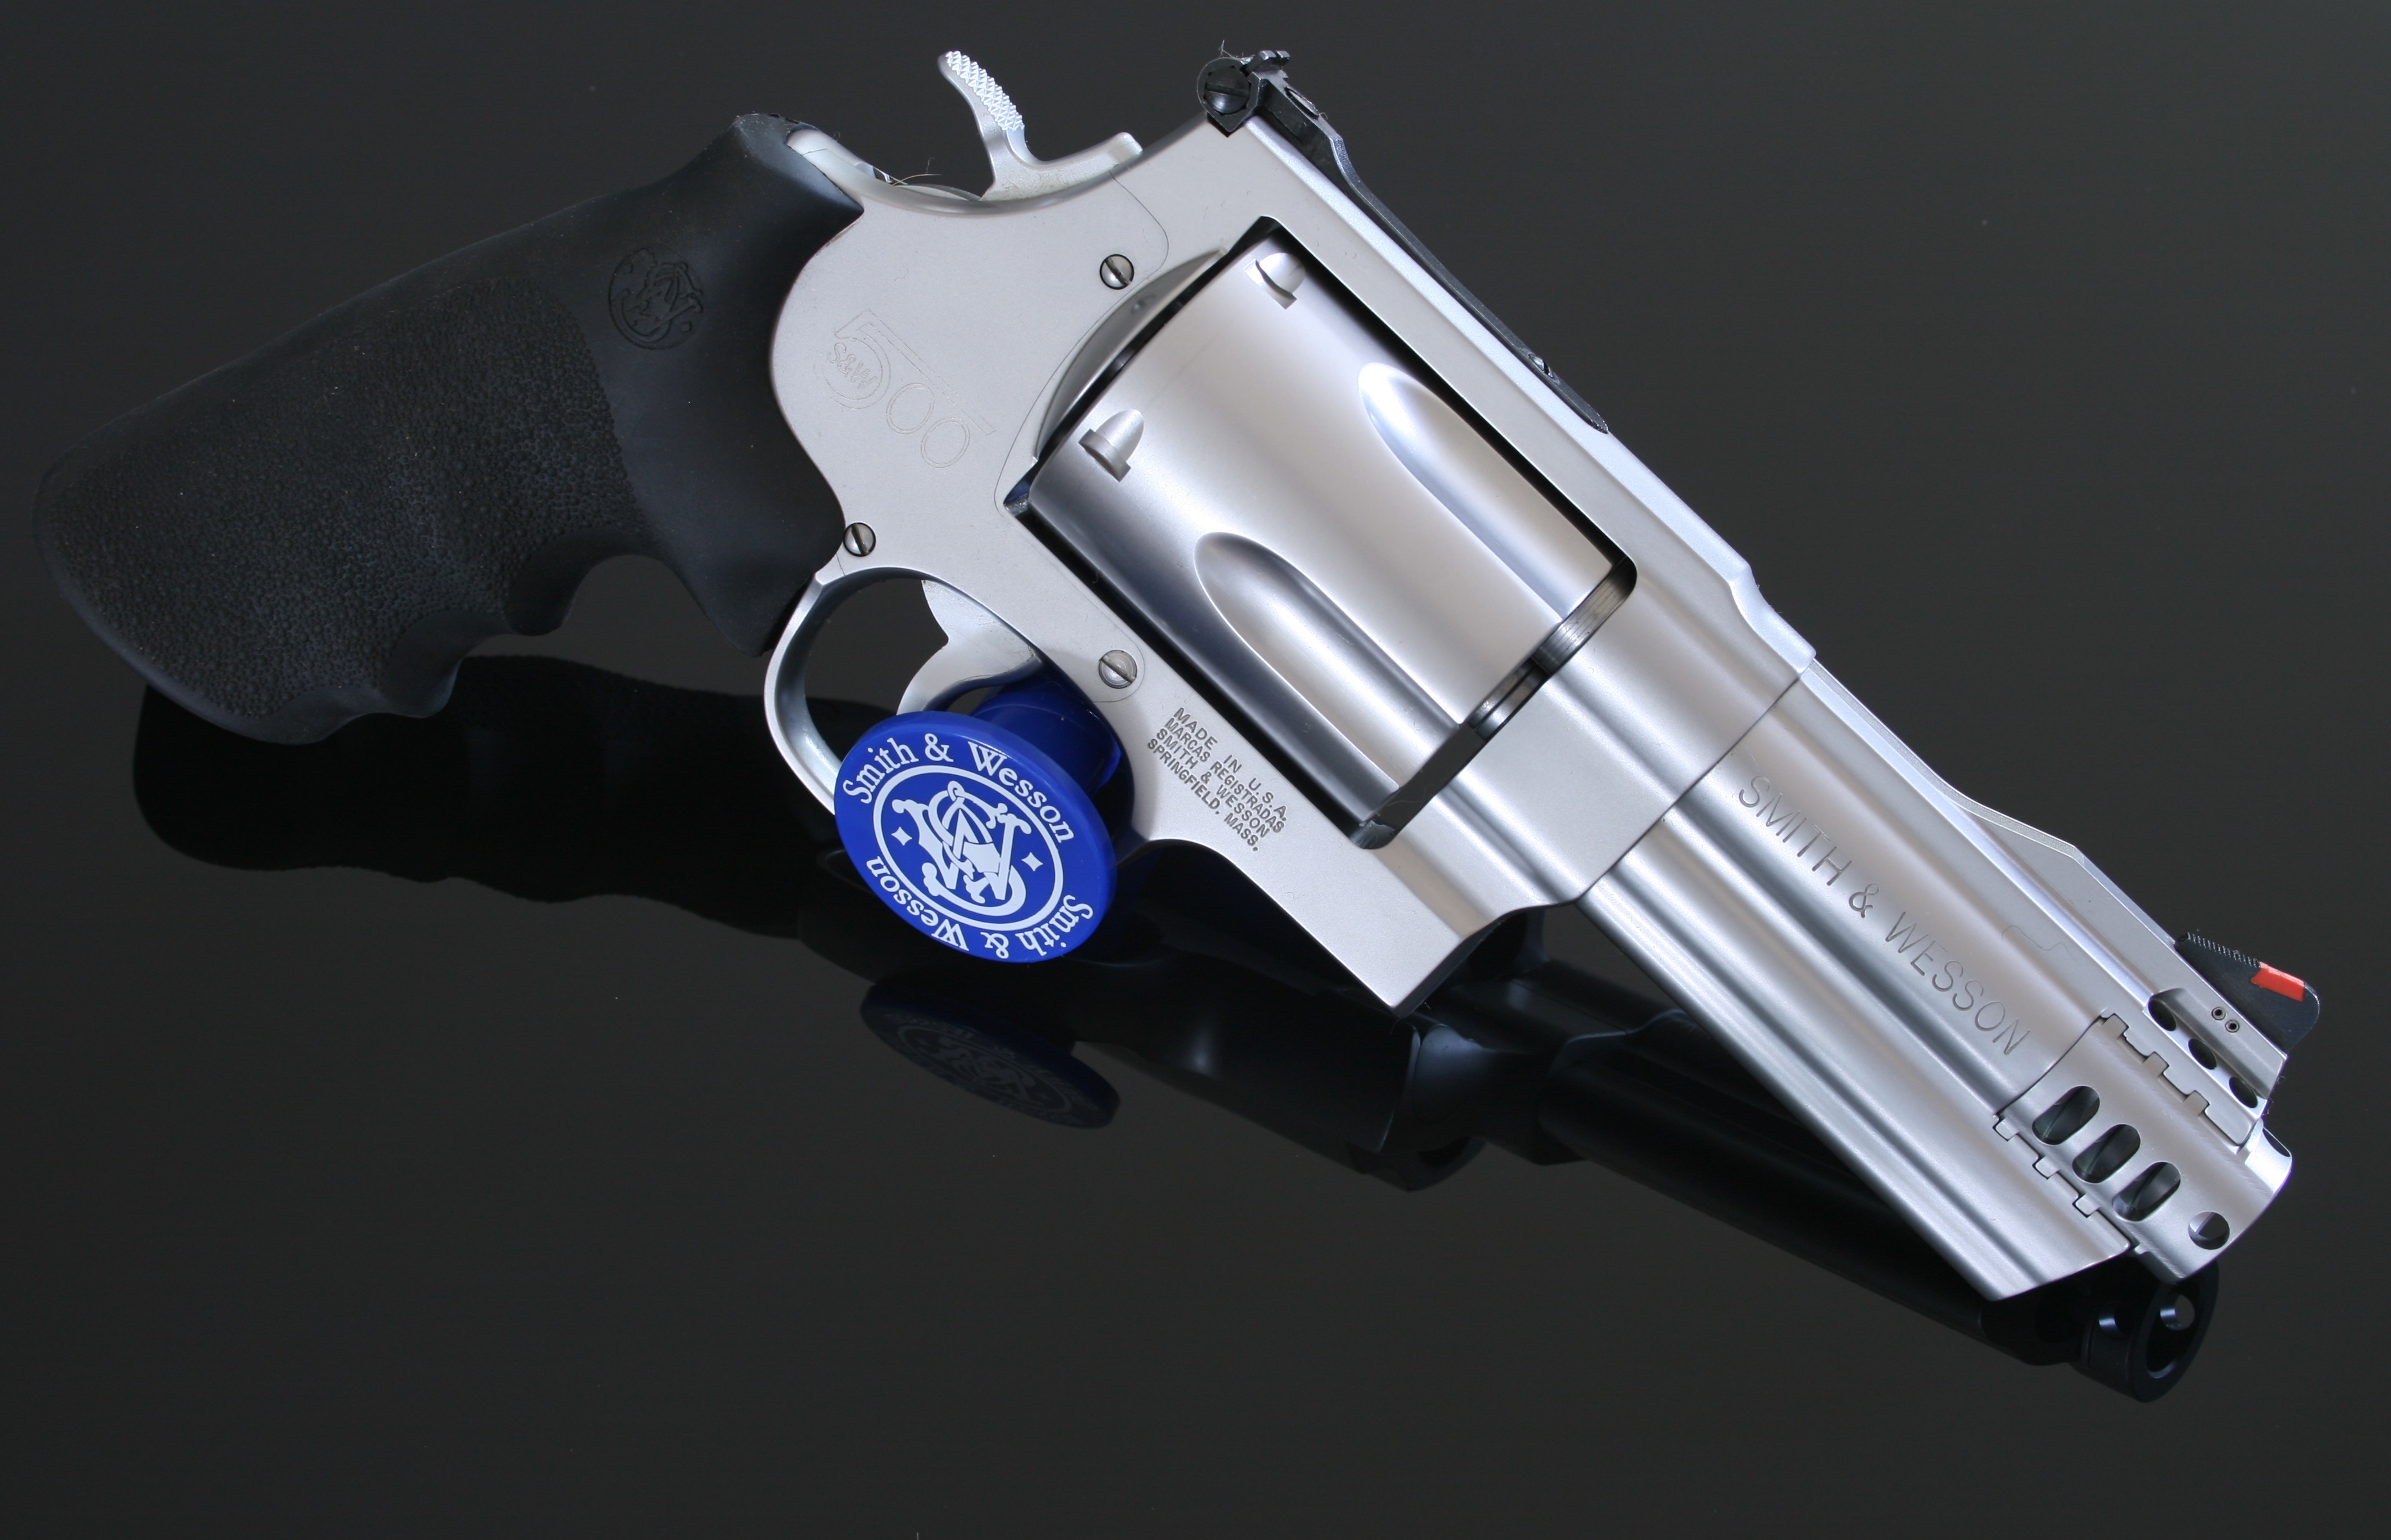 The Smith & Wesson 500: The World's Most Powerful (And Lethal) Handgun